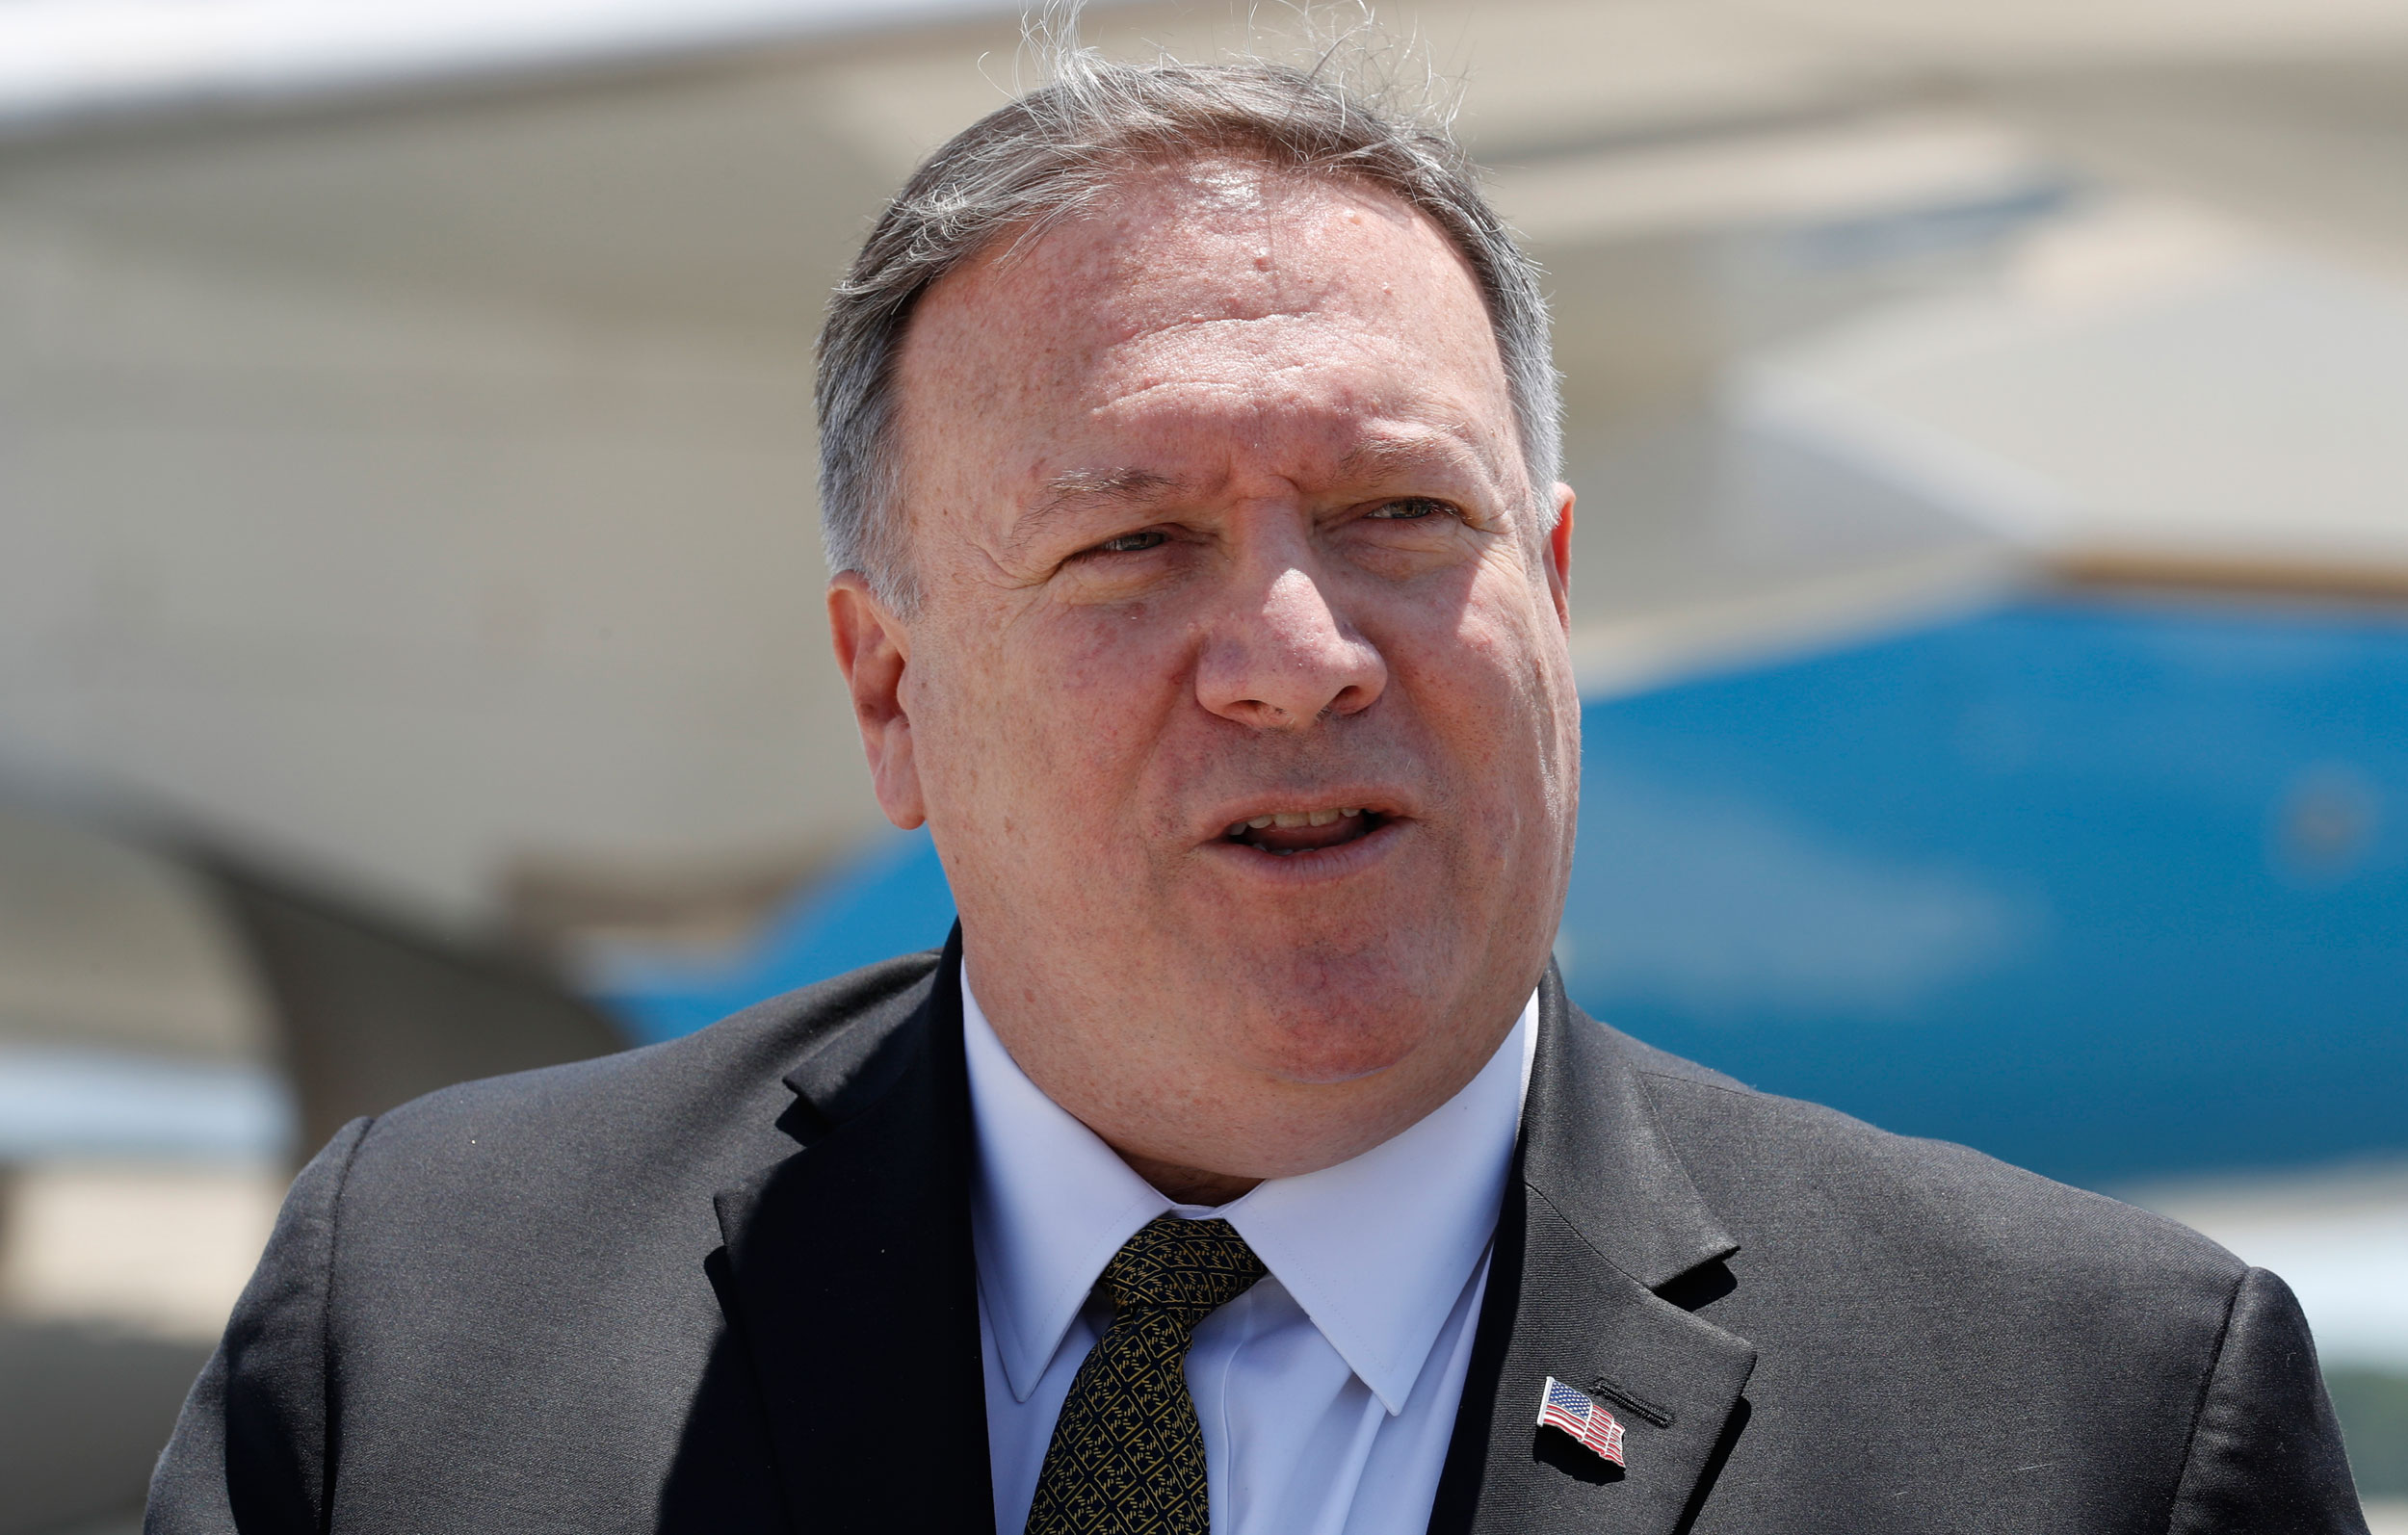 US secretary of state Mike Pompeo speaks to the media at Andrews Air Force Base, on June 23, 2019, before boarding a plane headed to Jeddah, Saudi Arabia. 
